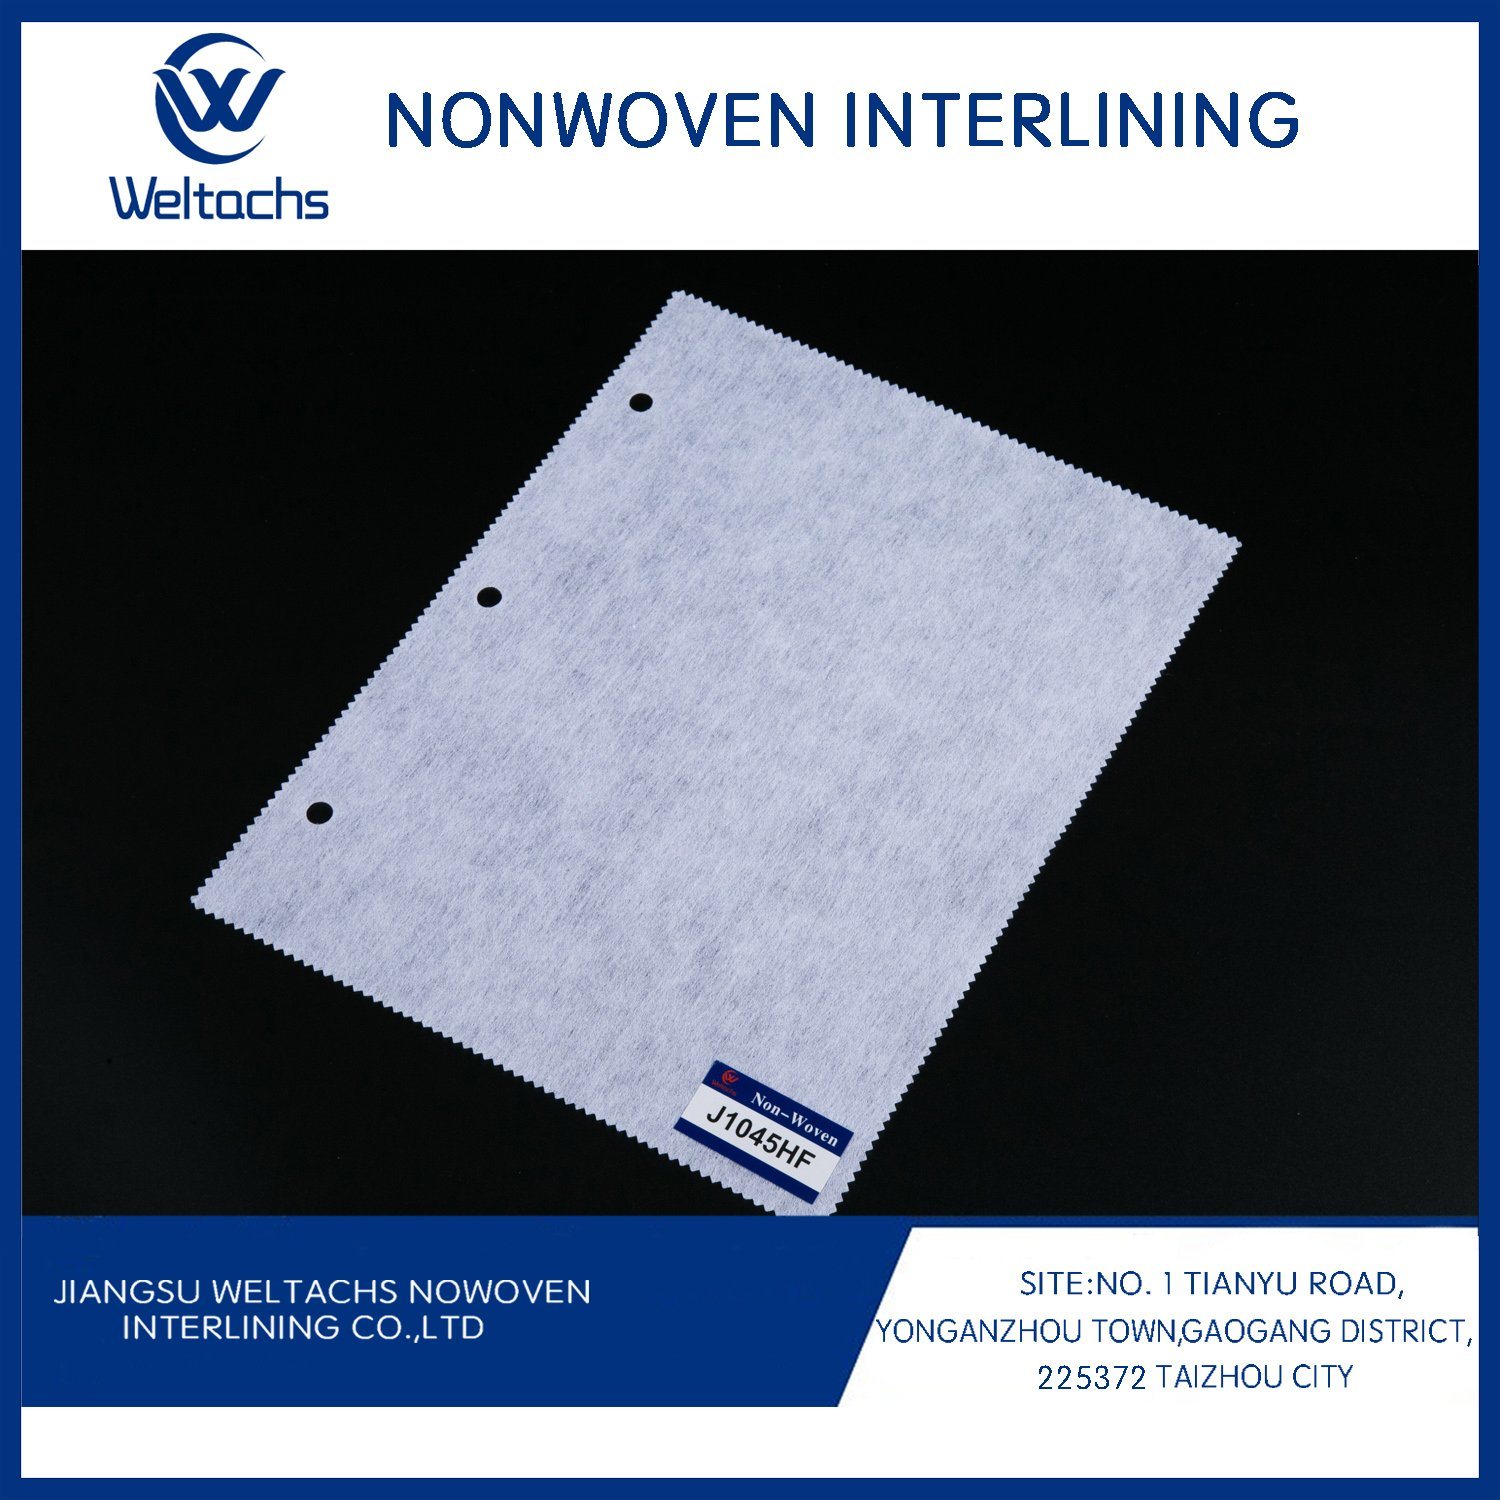 23 GSM All Types Selling Non Woven Fusing Interlining Fabric Nonwoven Interlining Fabric Fusing Interlining